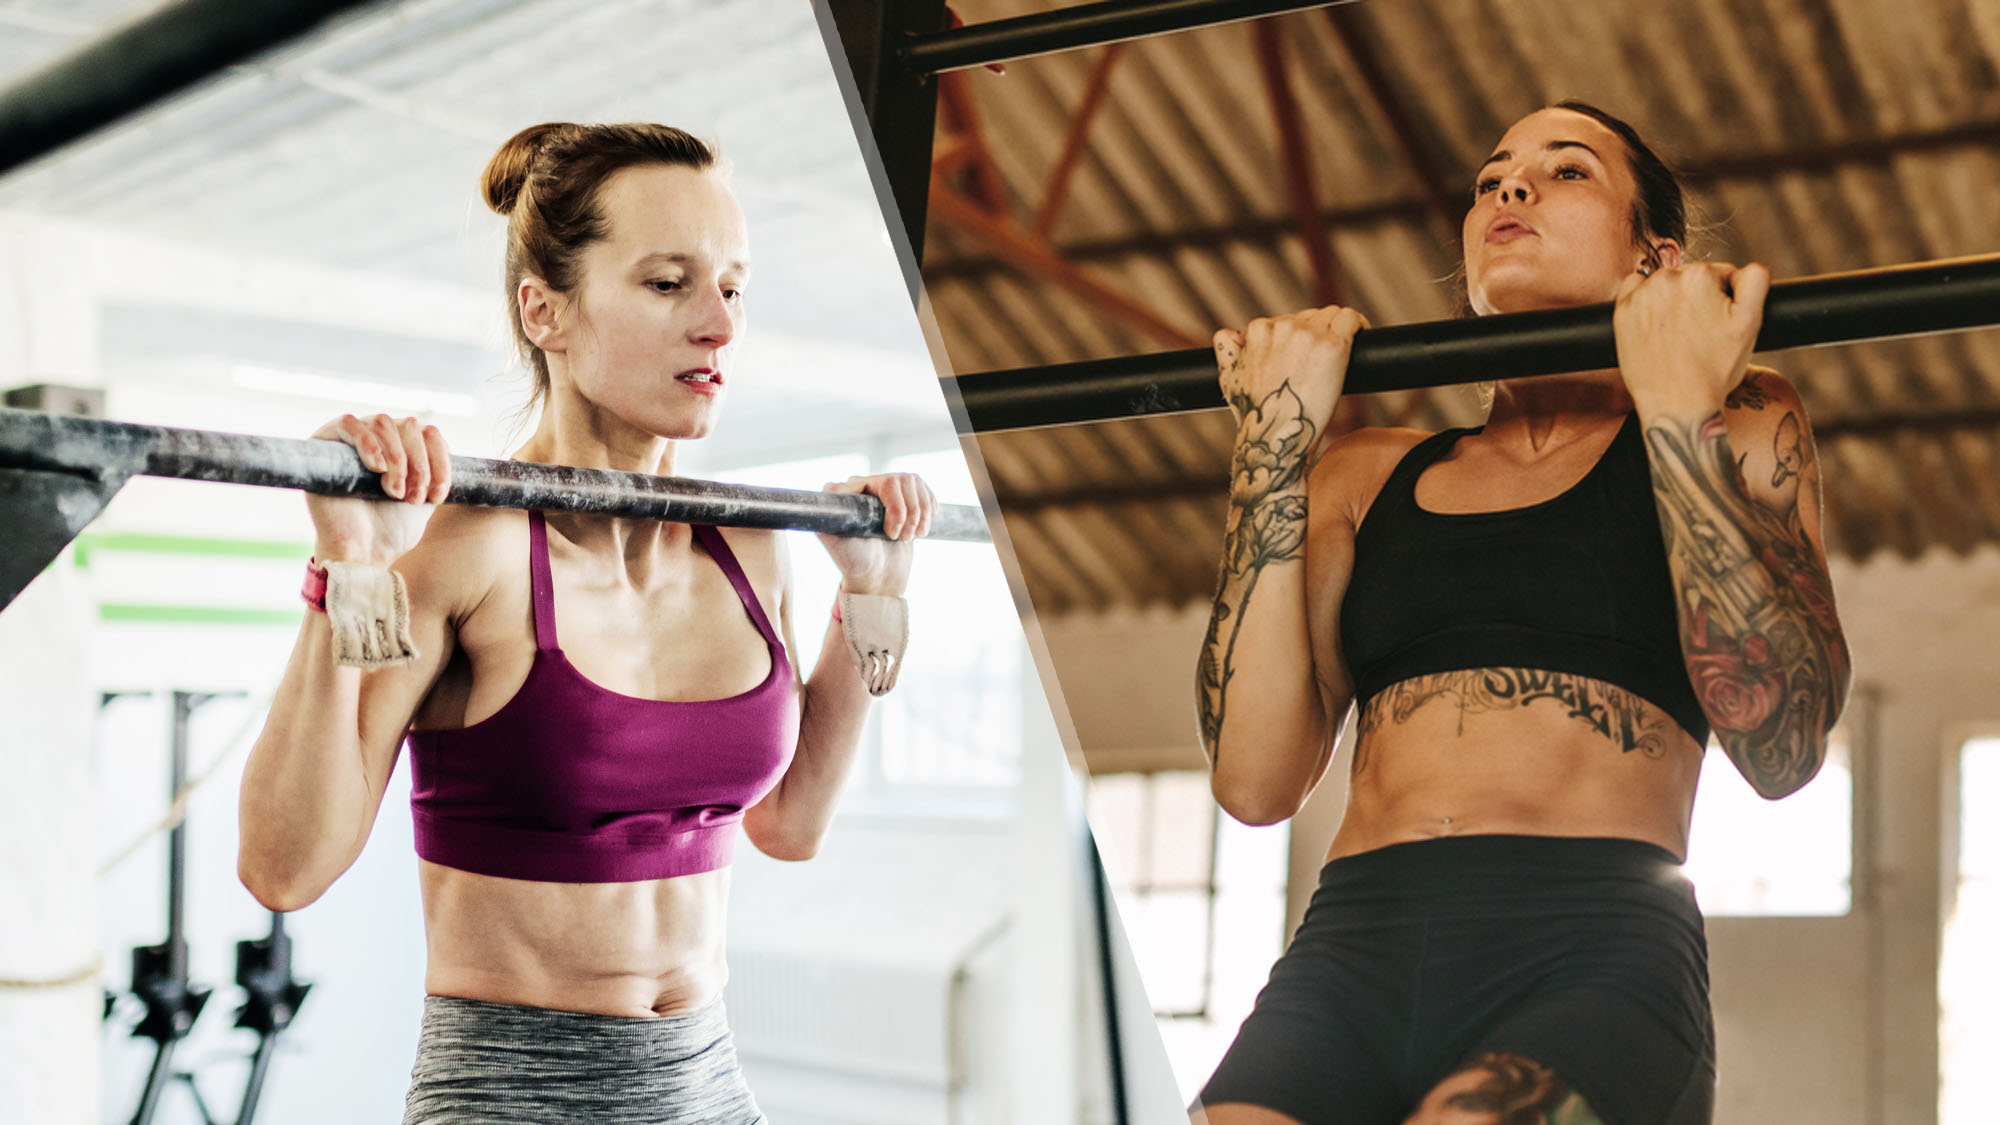 Pull-ups vs chin-ups: Which is better for building strength?